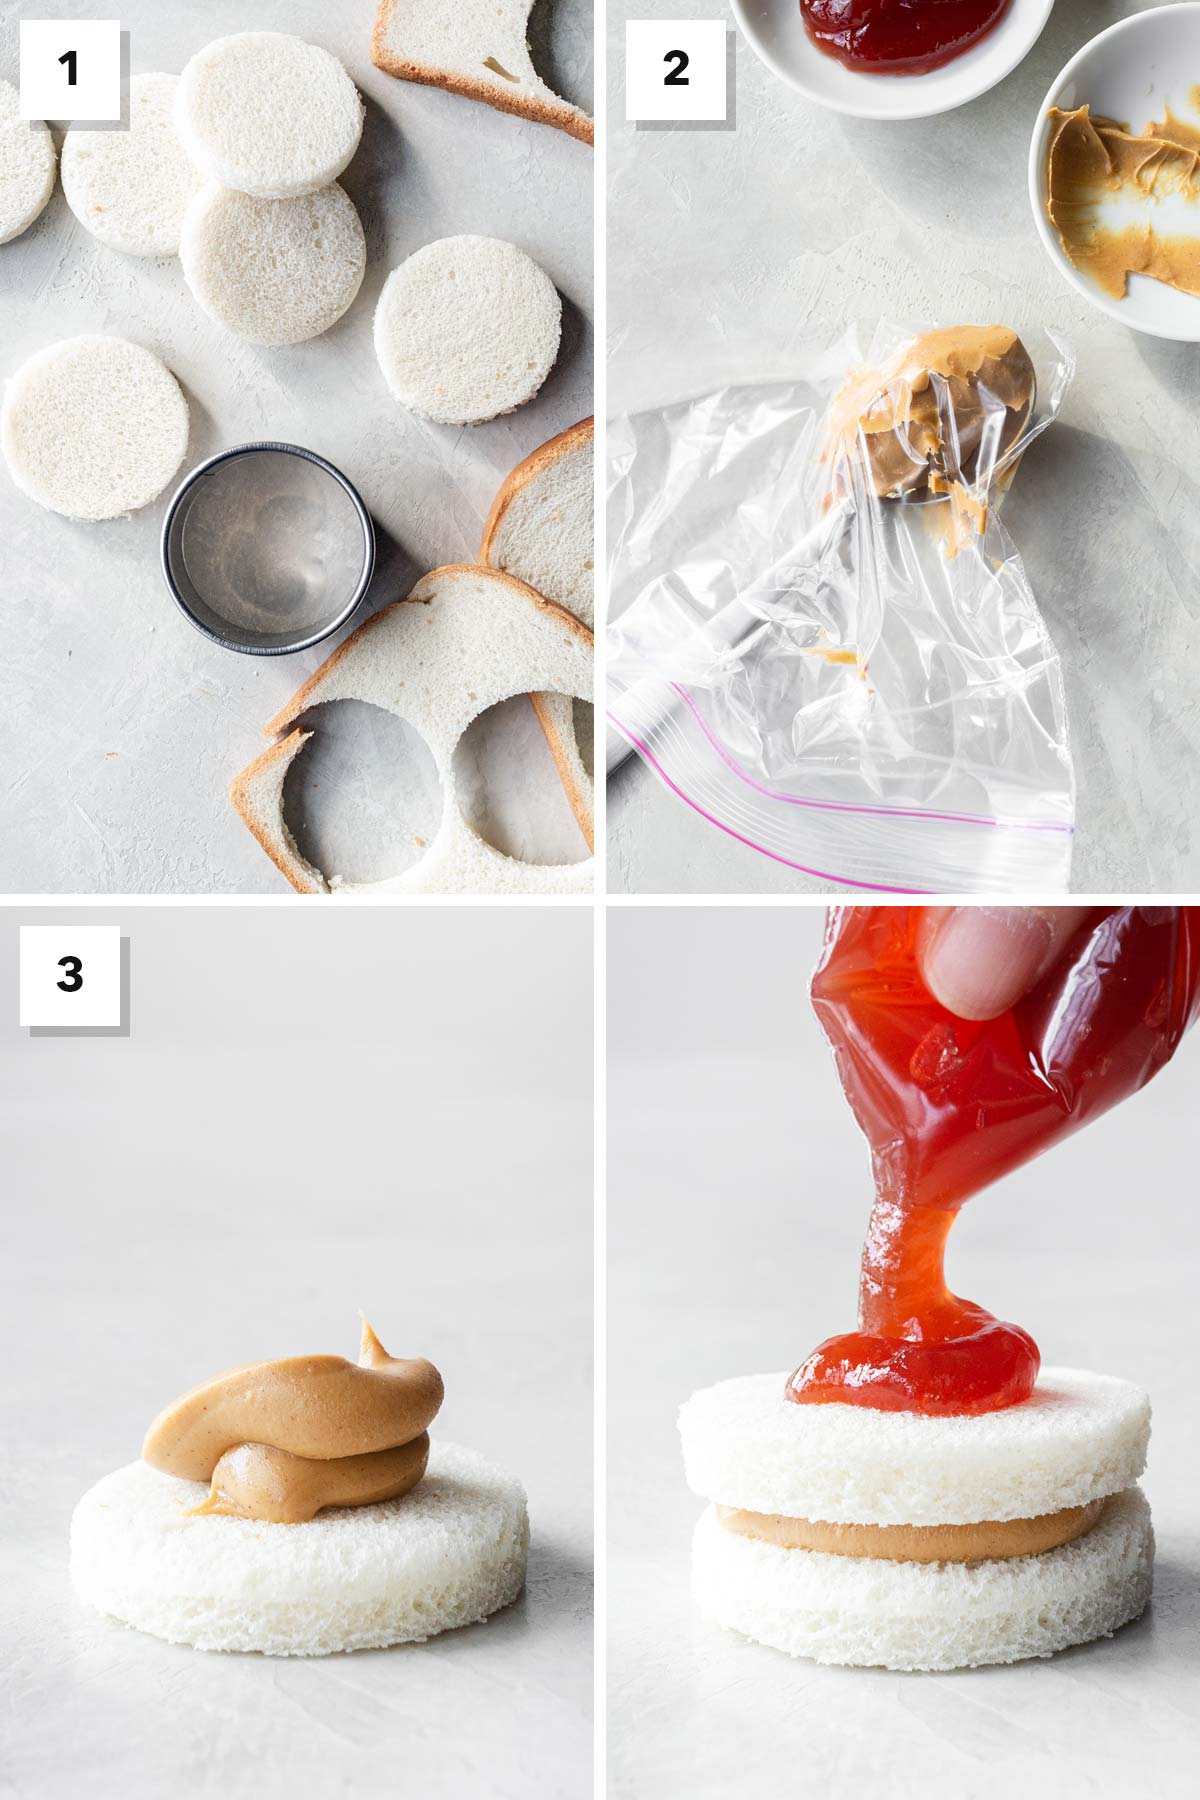 Four photo collage showing steps to make peanut butter and jelly tea sandwiches.